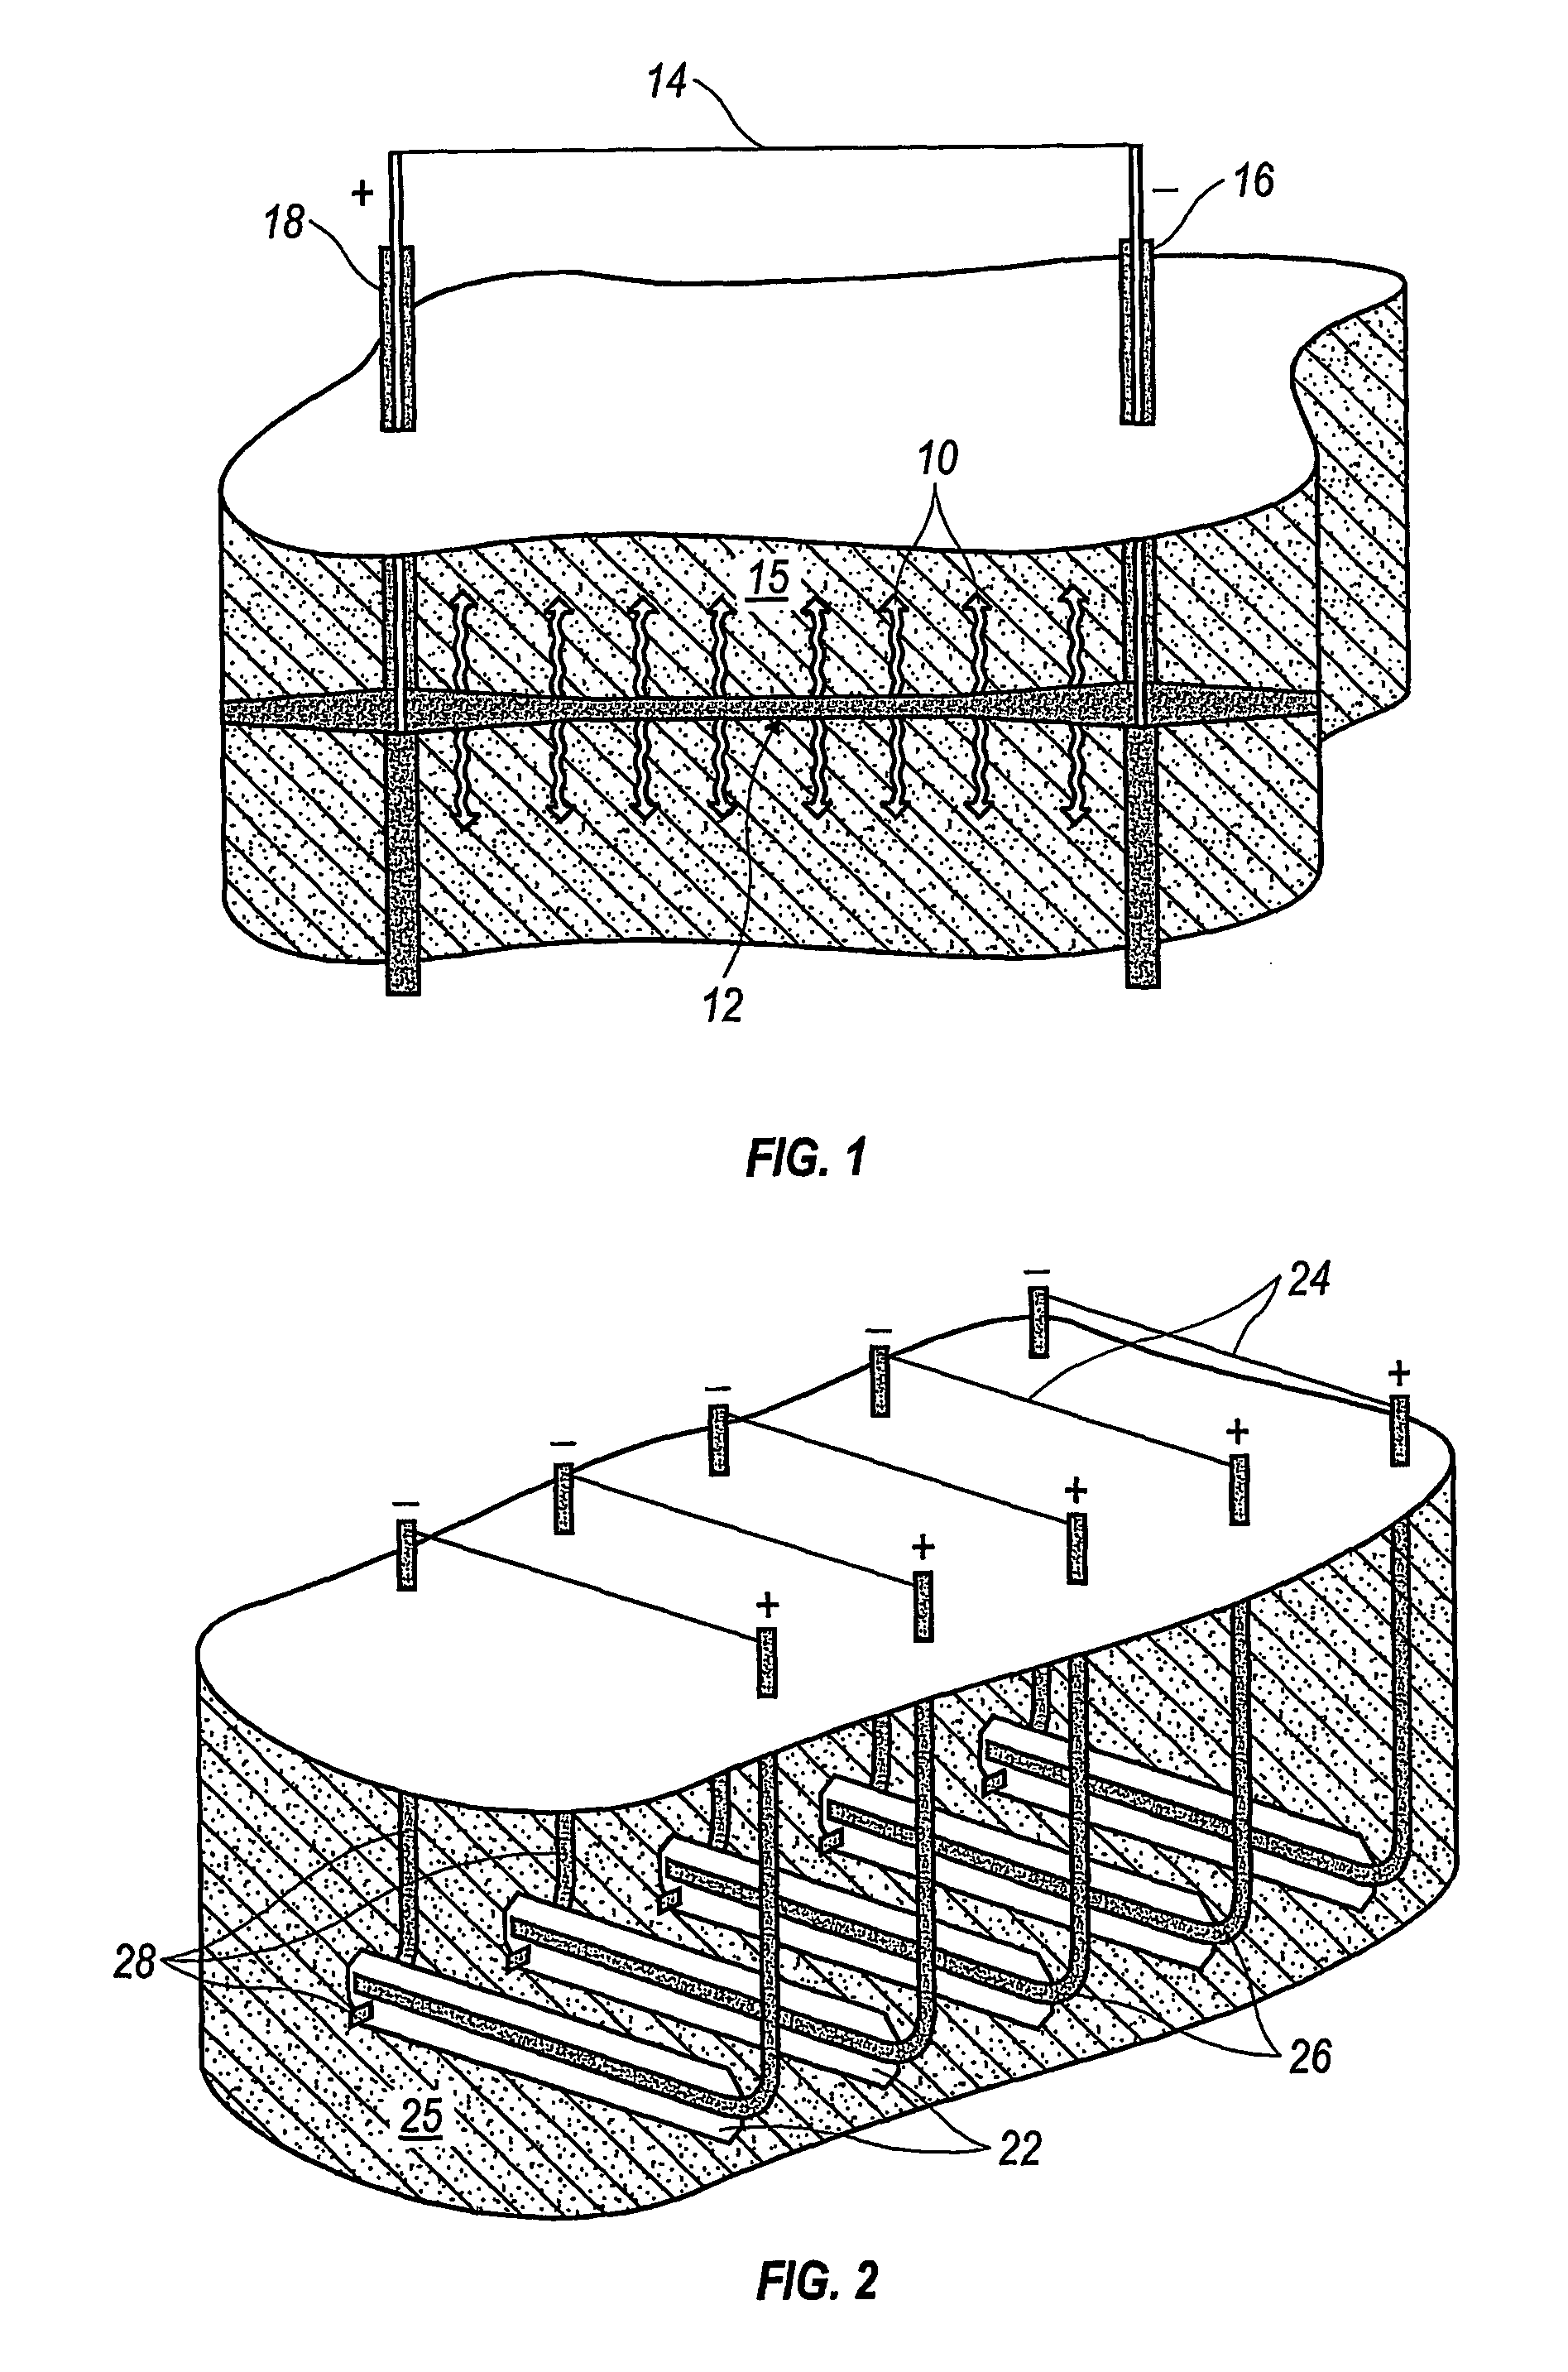 Methods of treating a subterranean formation to convert organic matter into producible hydrocarbons